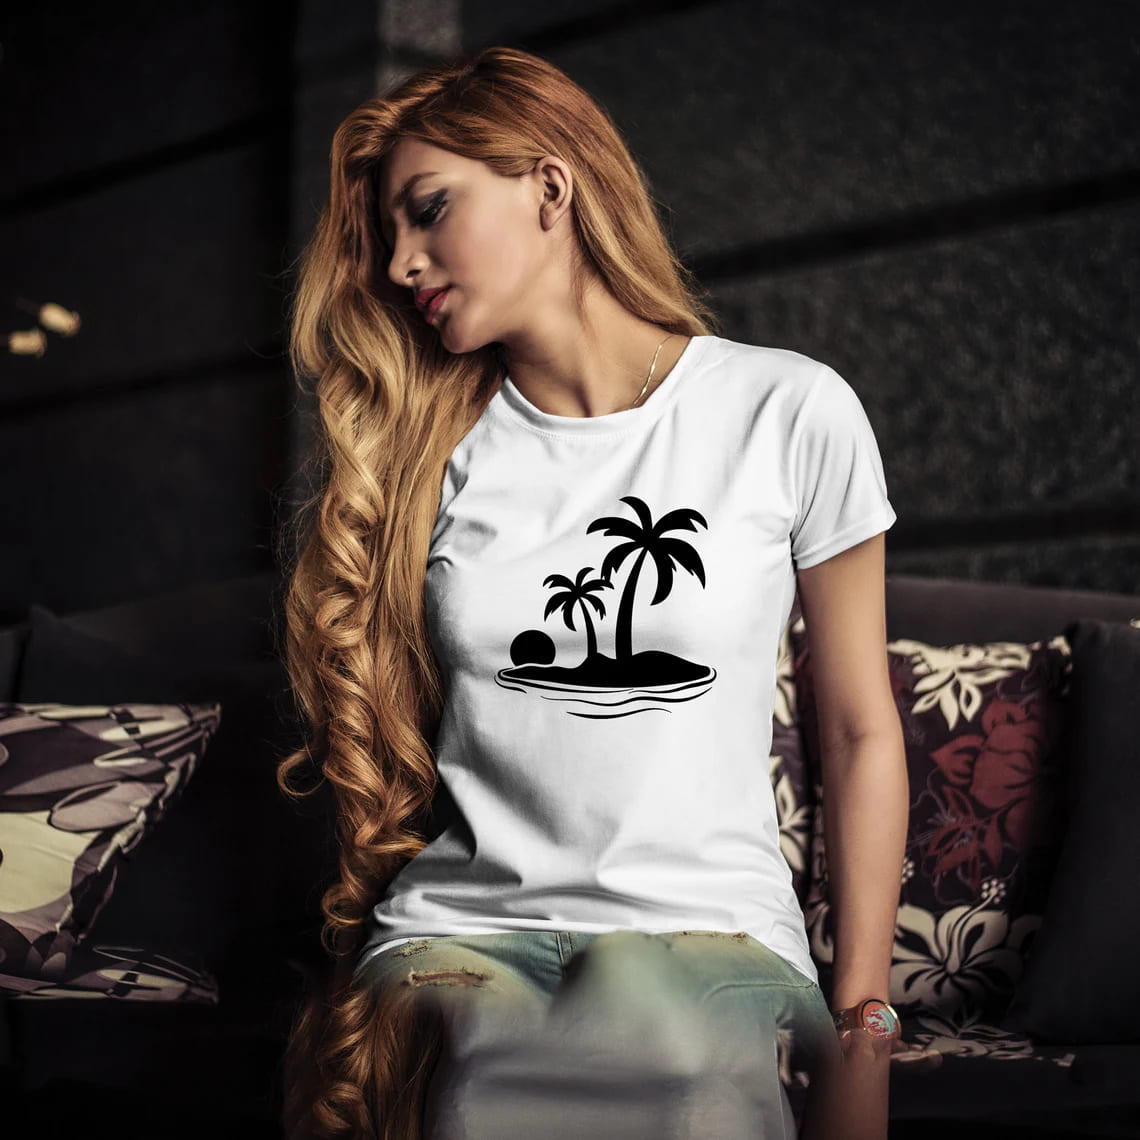 A girl in a white t-shirt with the image of palm trees.